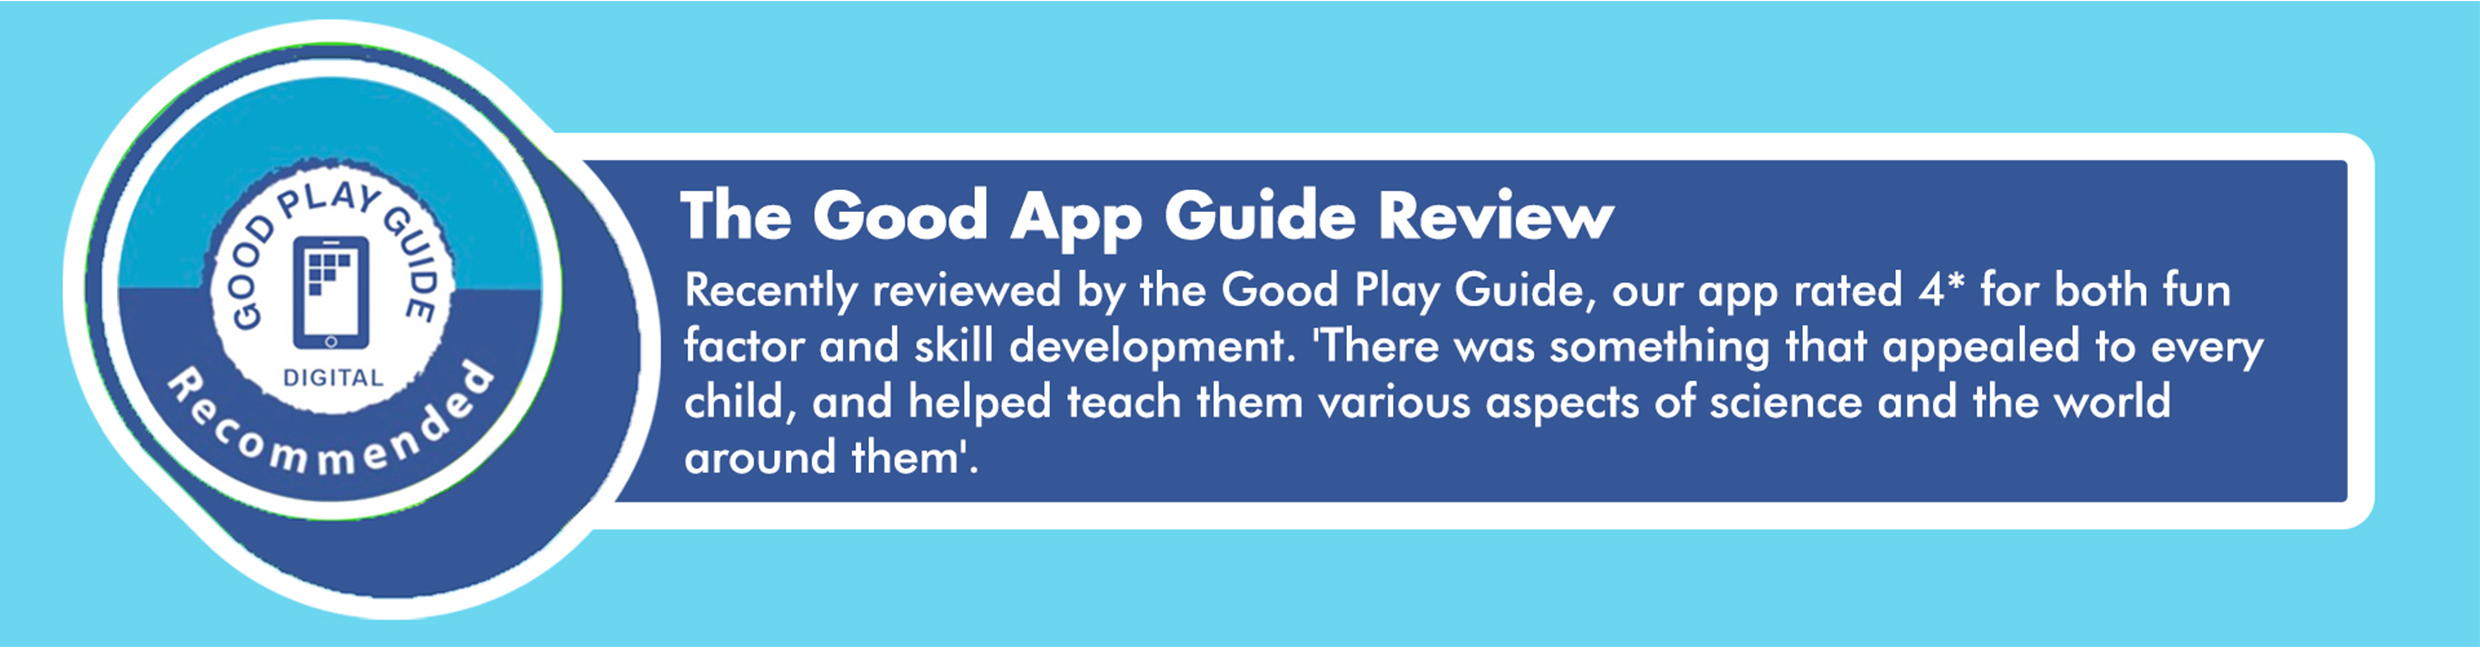 Recently reviewed by the Good Play Guide, our app rated 4* for both fun factor and skill development. 'There was something that appealed to every child, and helped teach them various aspects of science and the world around them'.